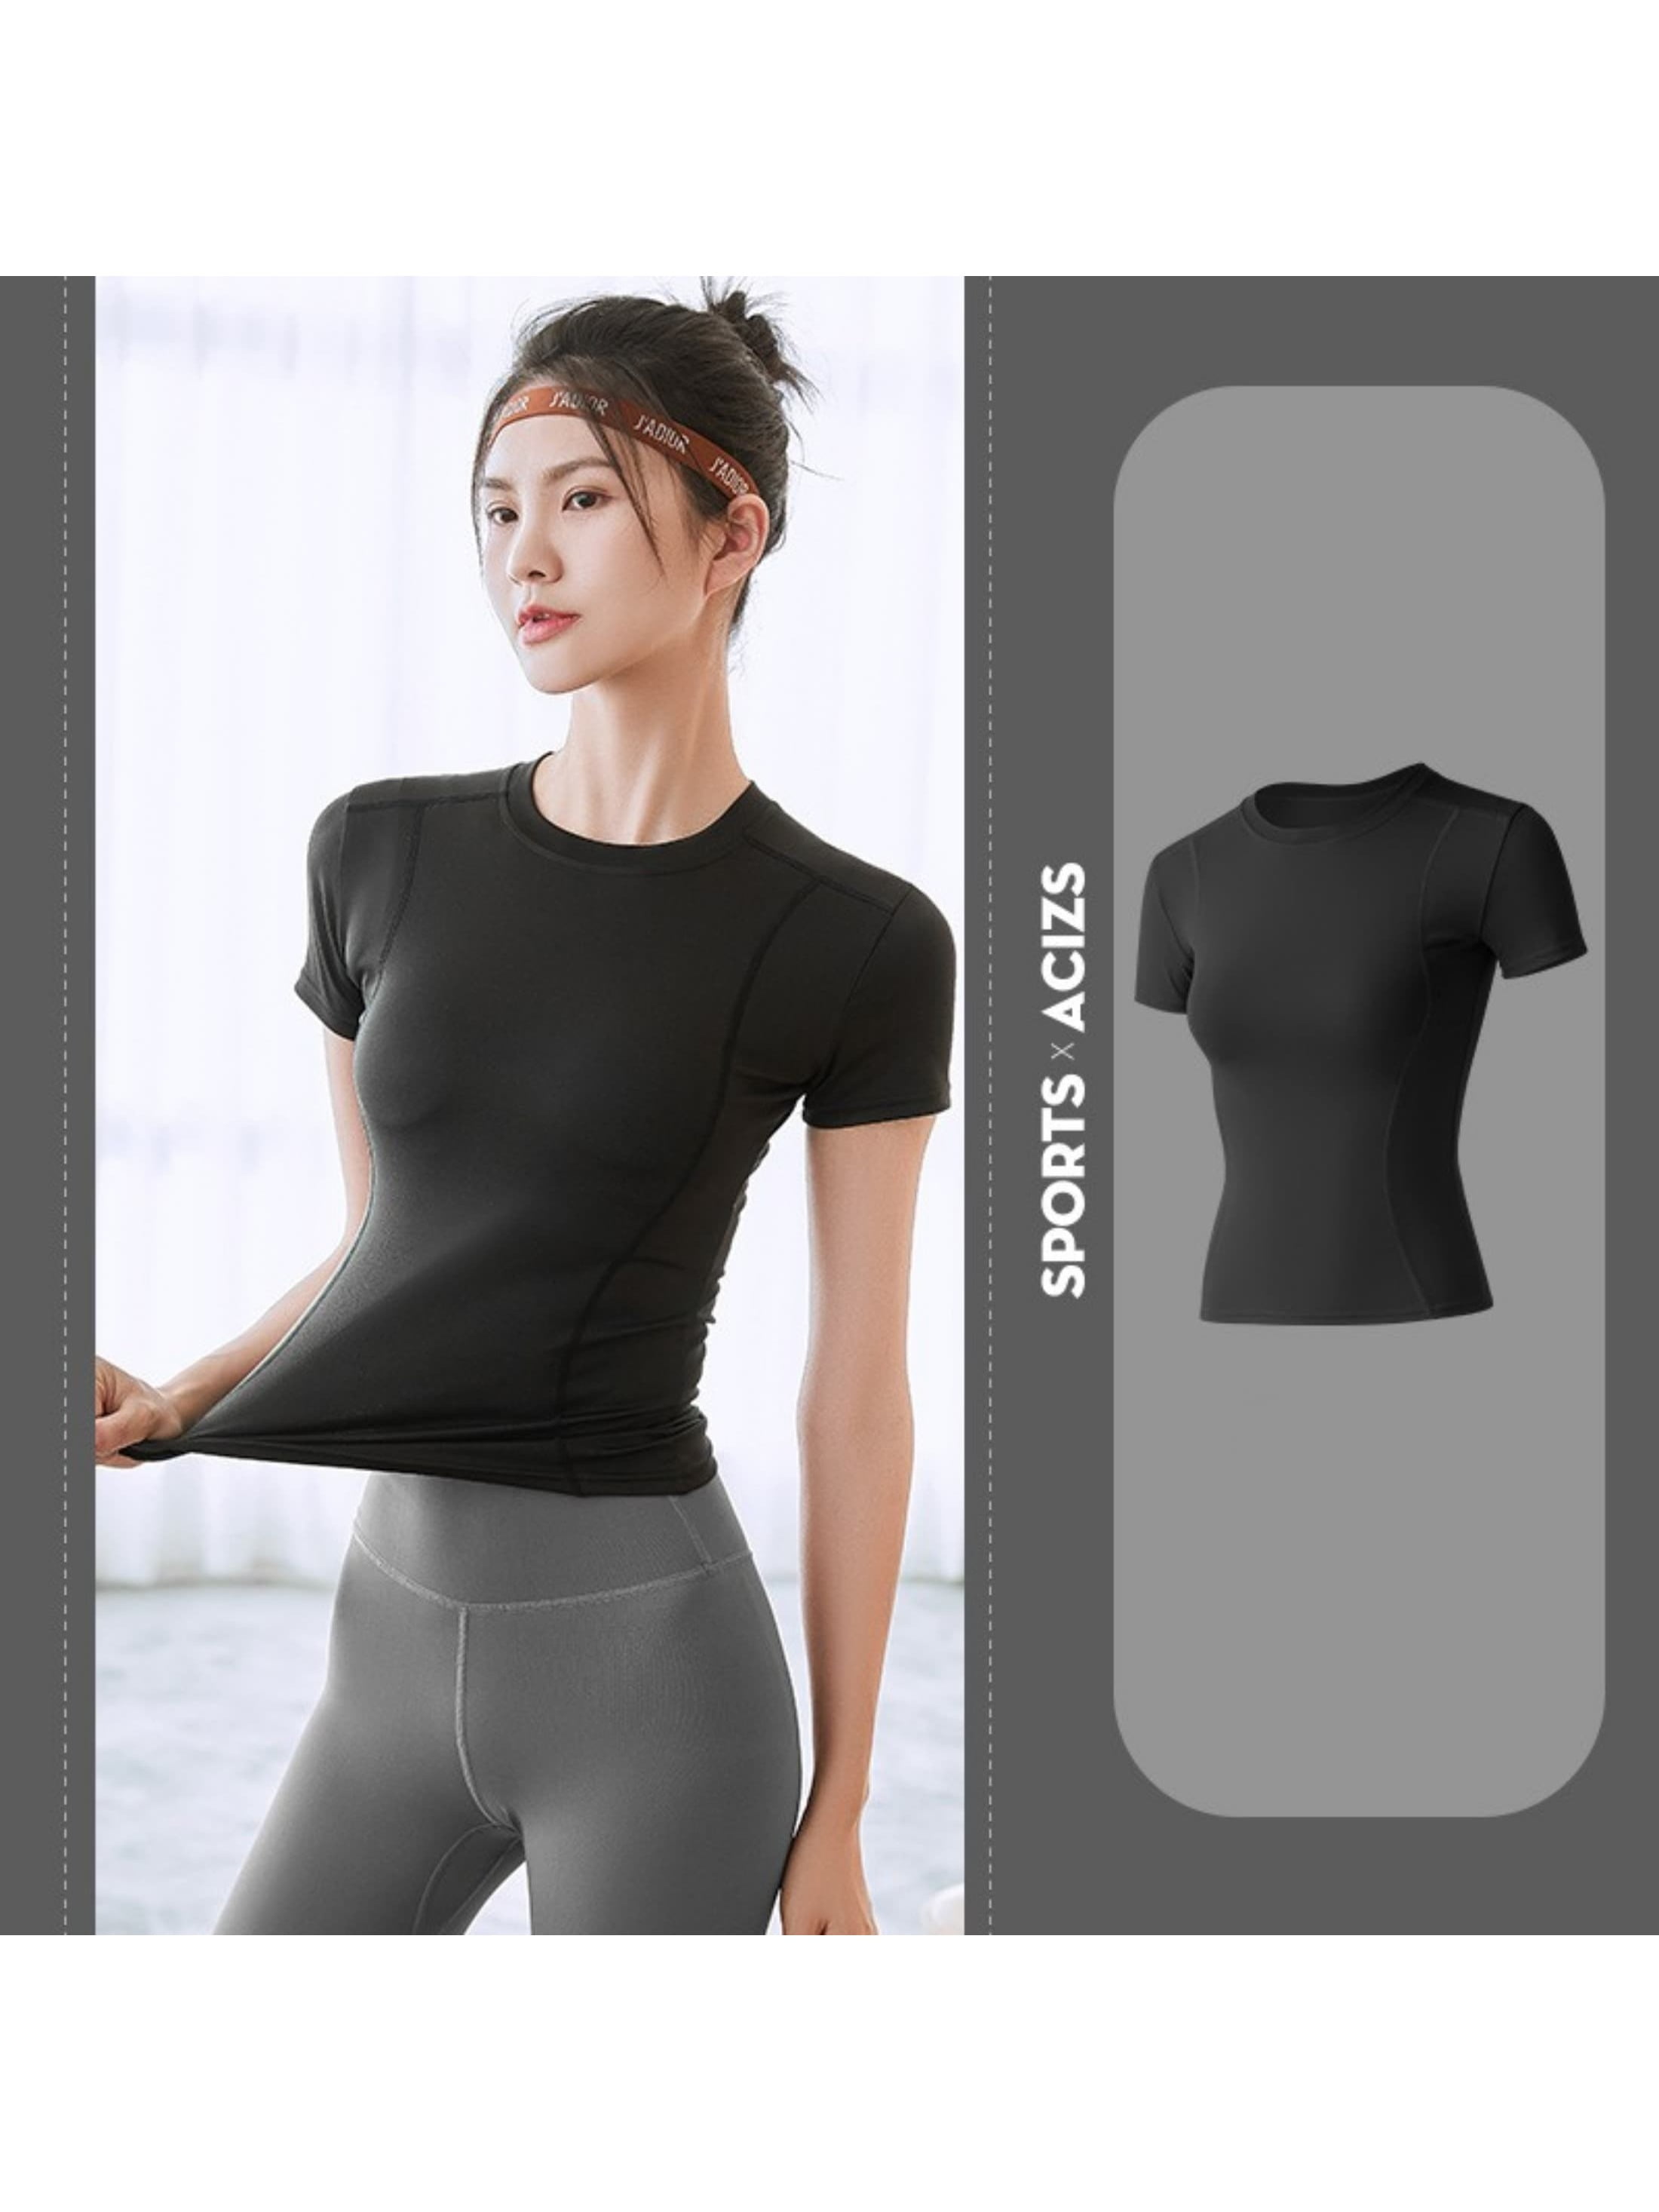 Women T-Shirt Short-Sleeved Bare Shoulders Sexy Tight Yoga Clothes